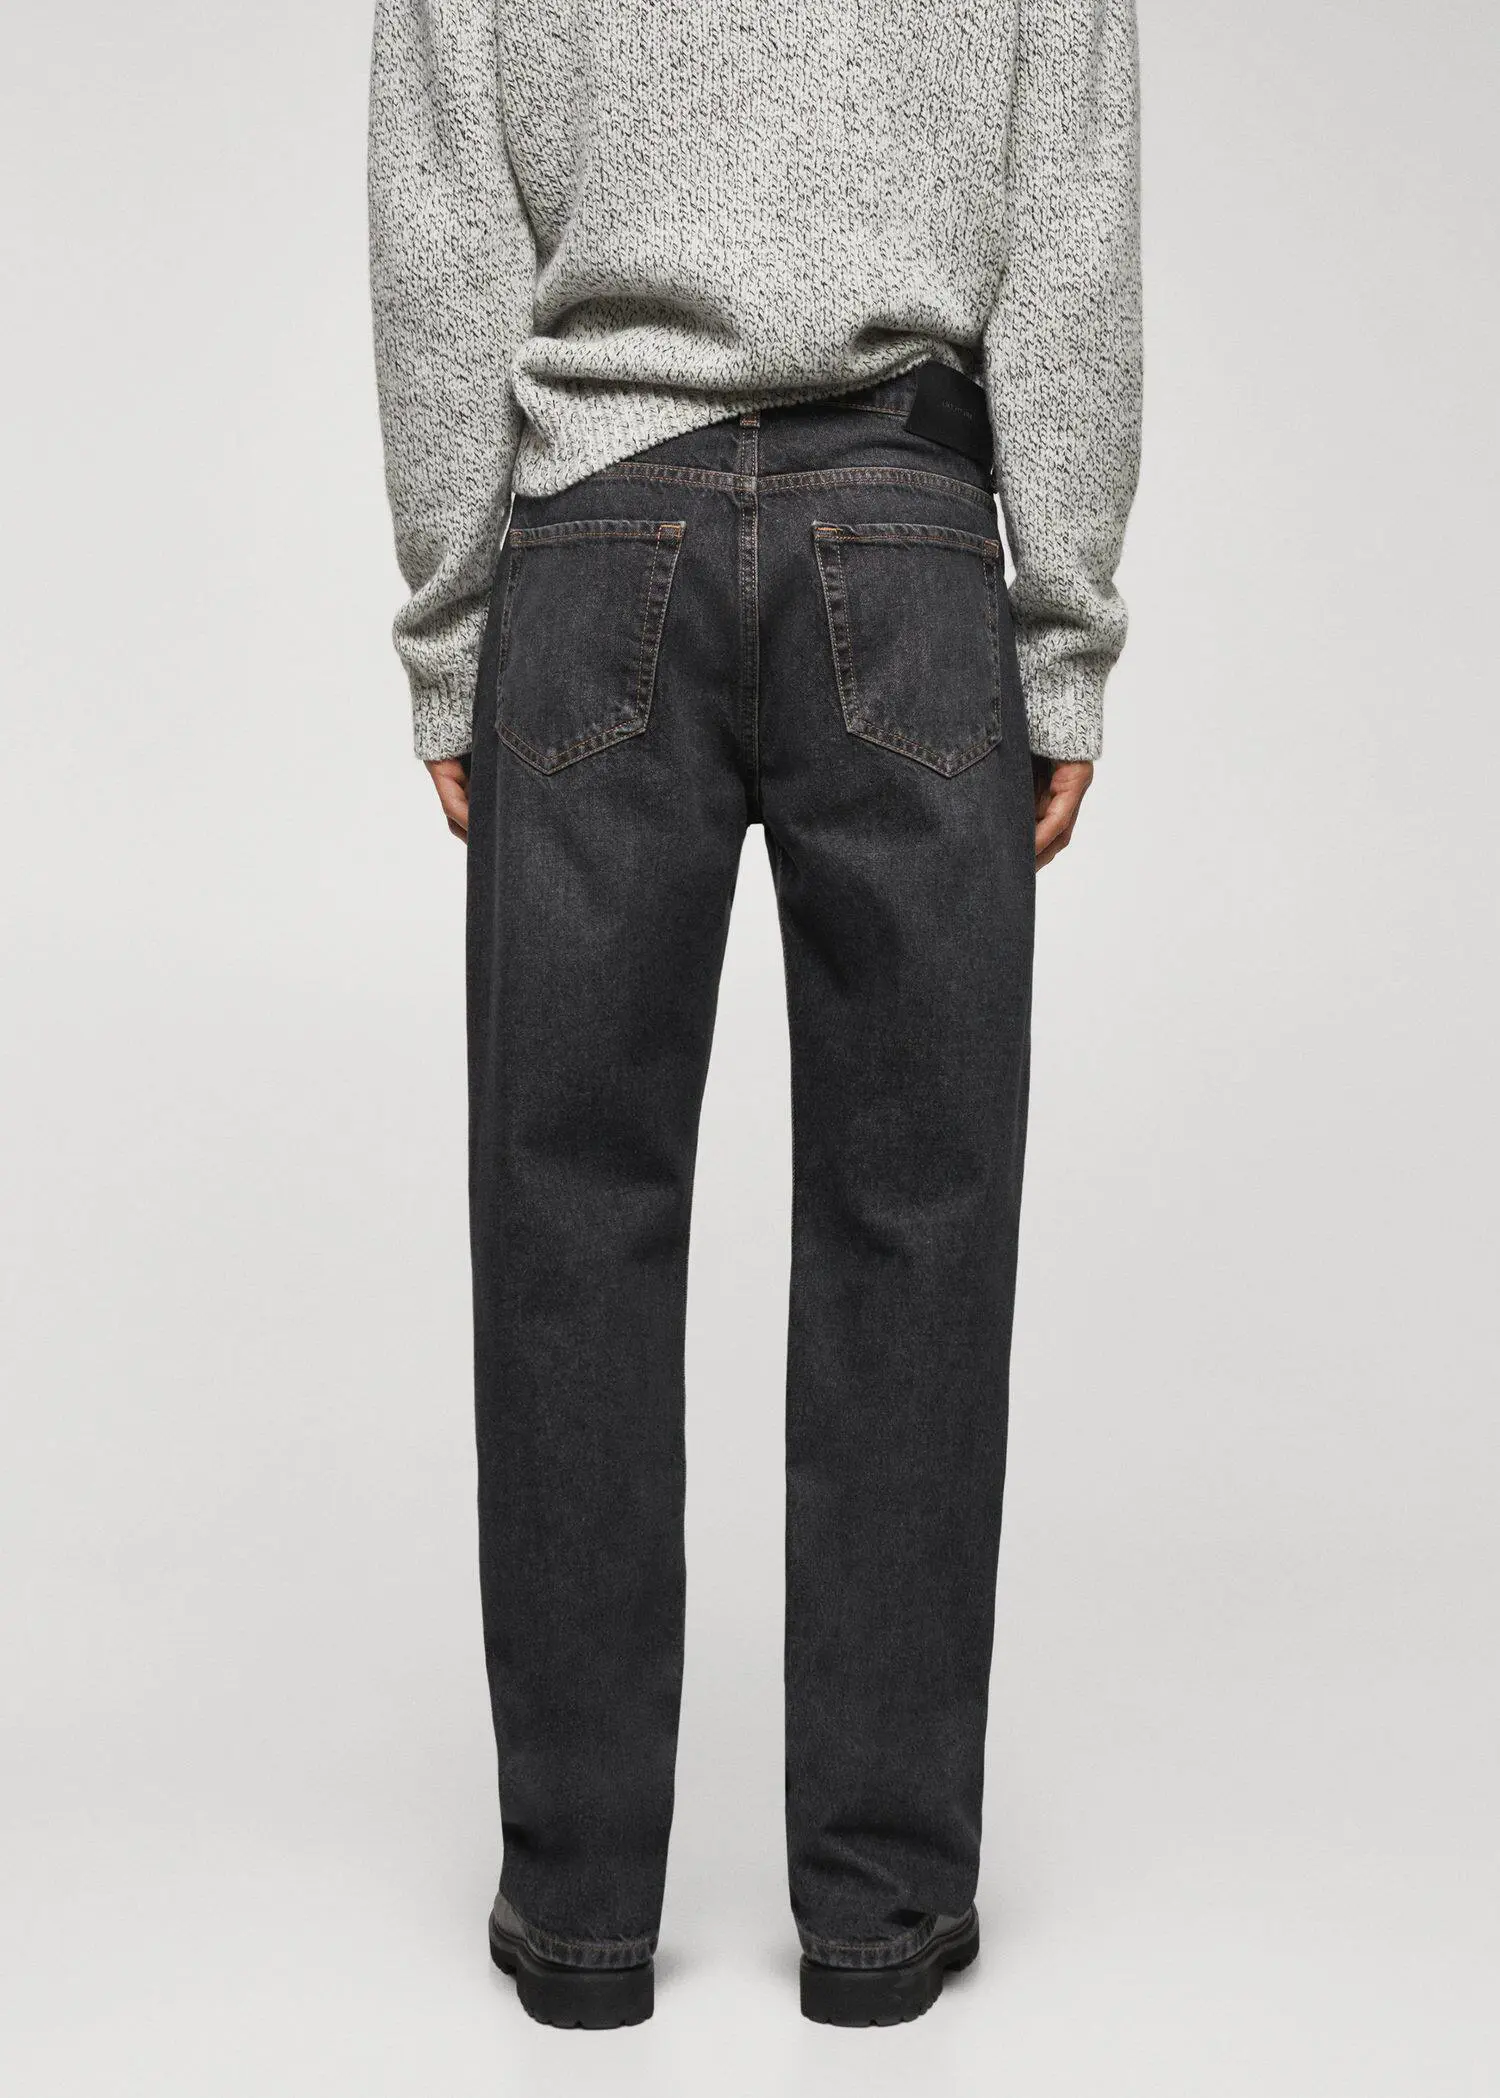 Mango Relaxed fit dark wash jeans. 3